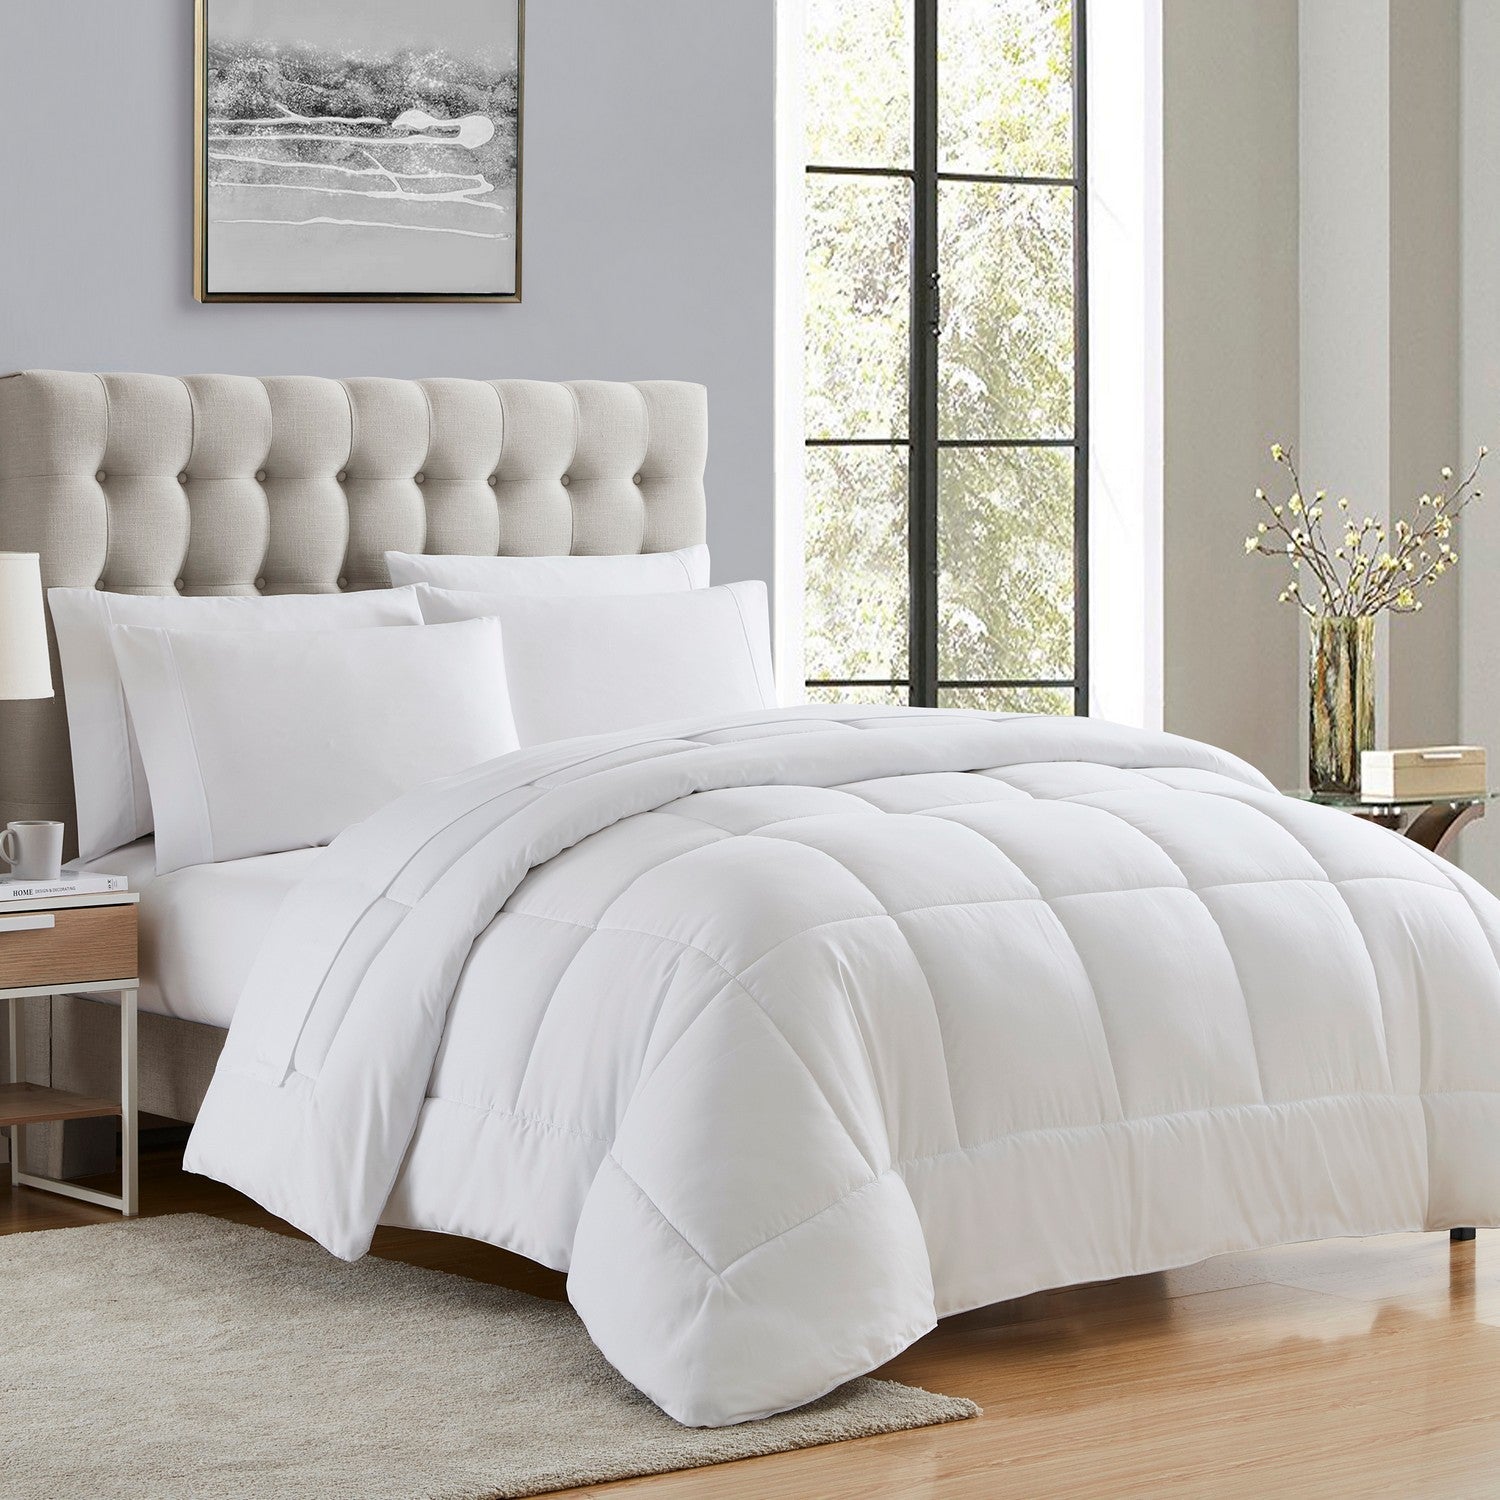 Basic 5-Piece Bed in a Bag  Set White - Folded